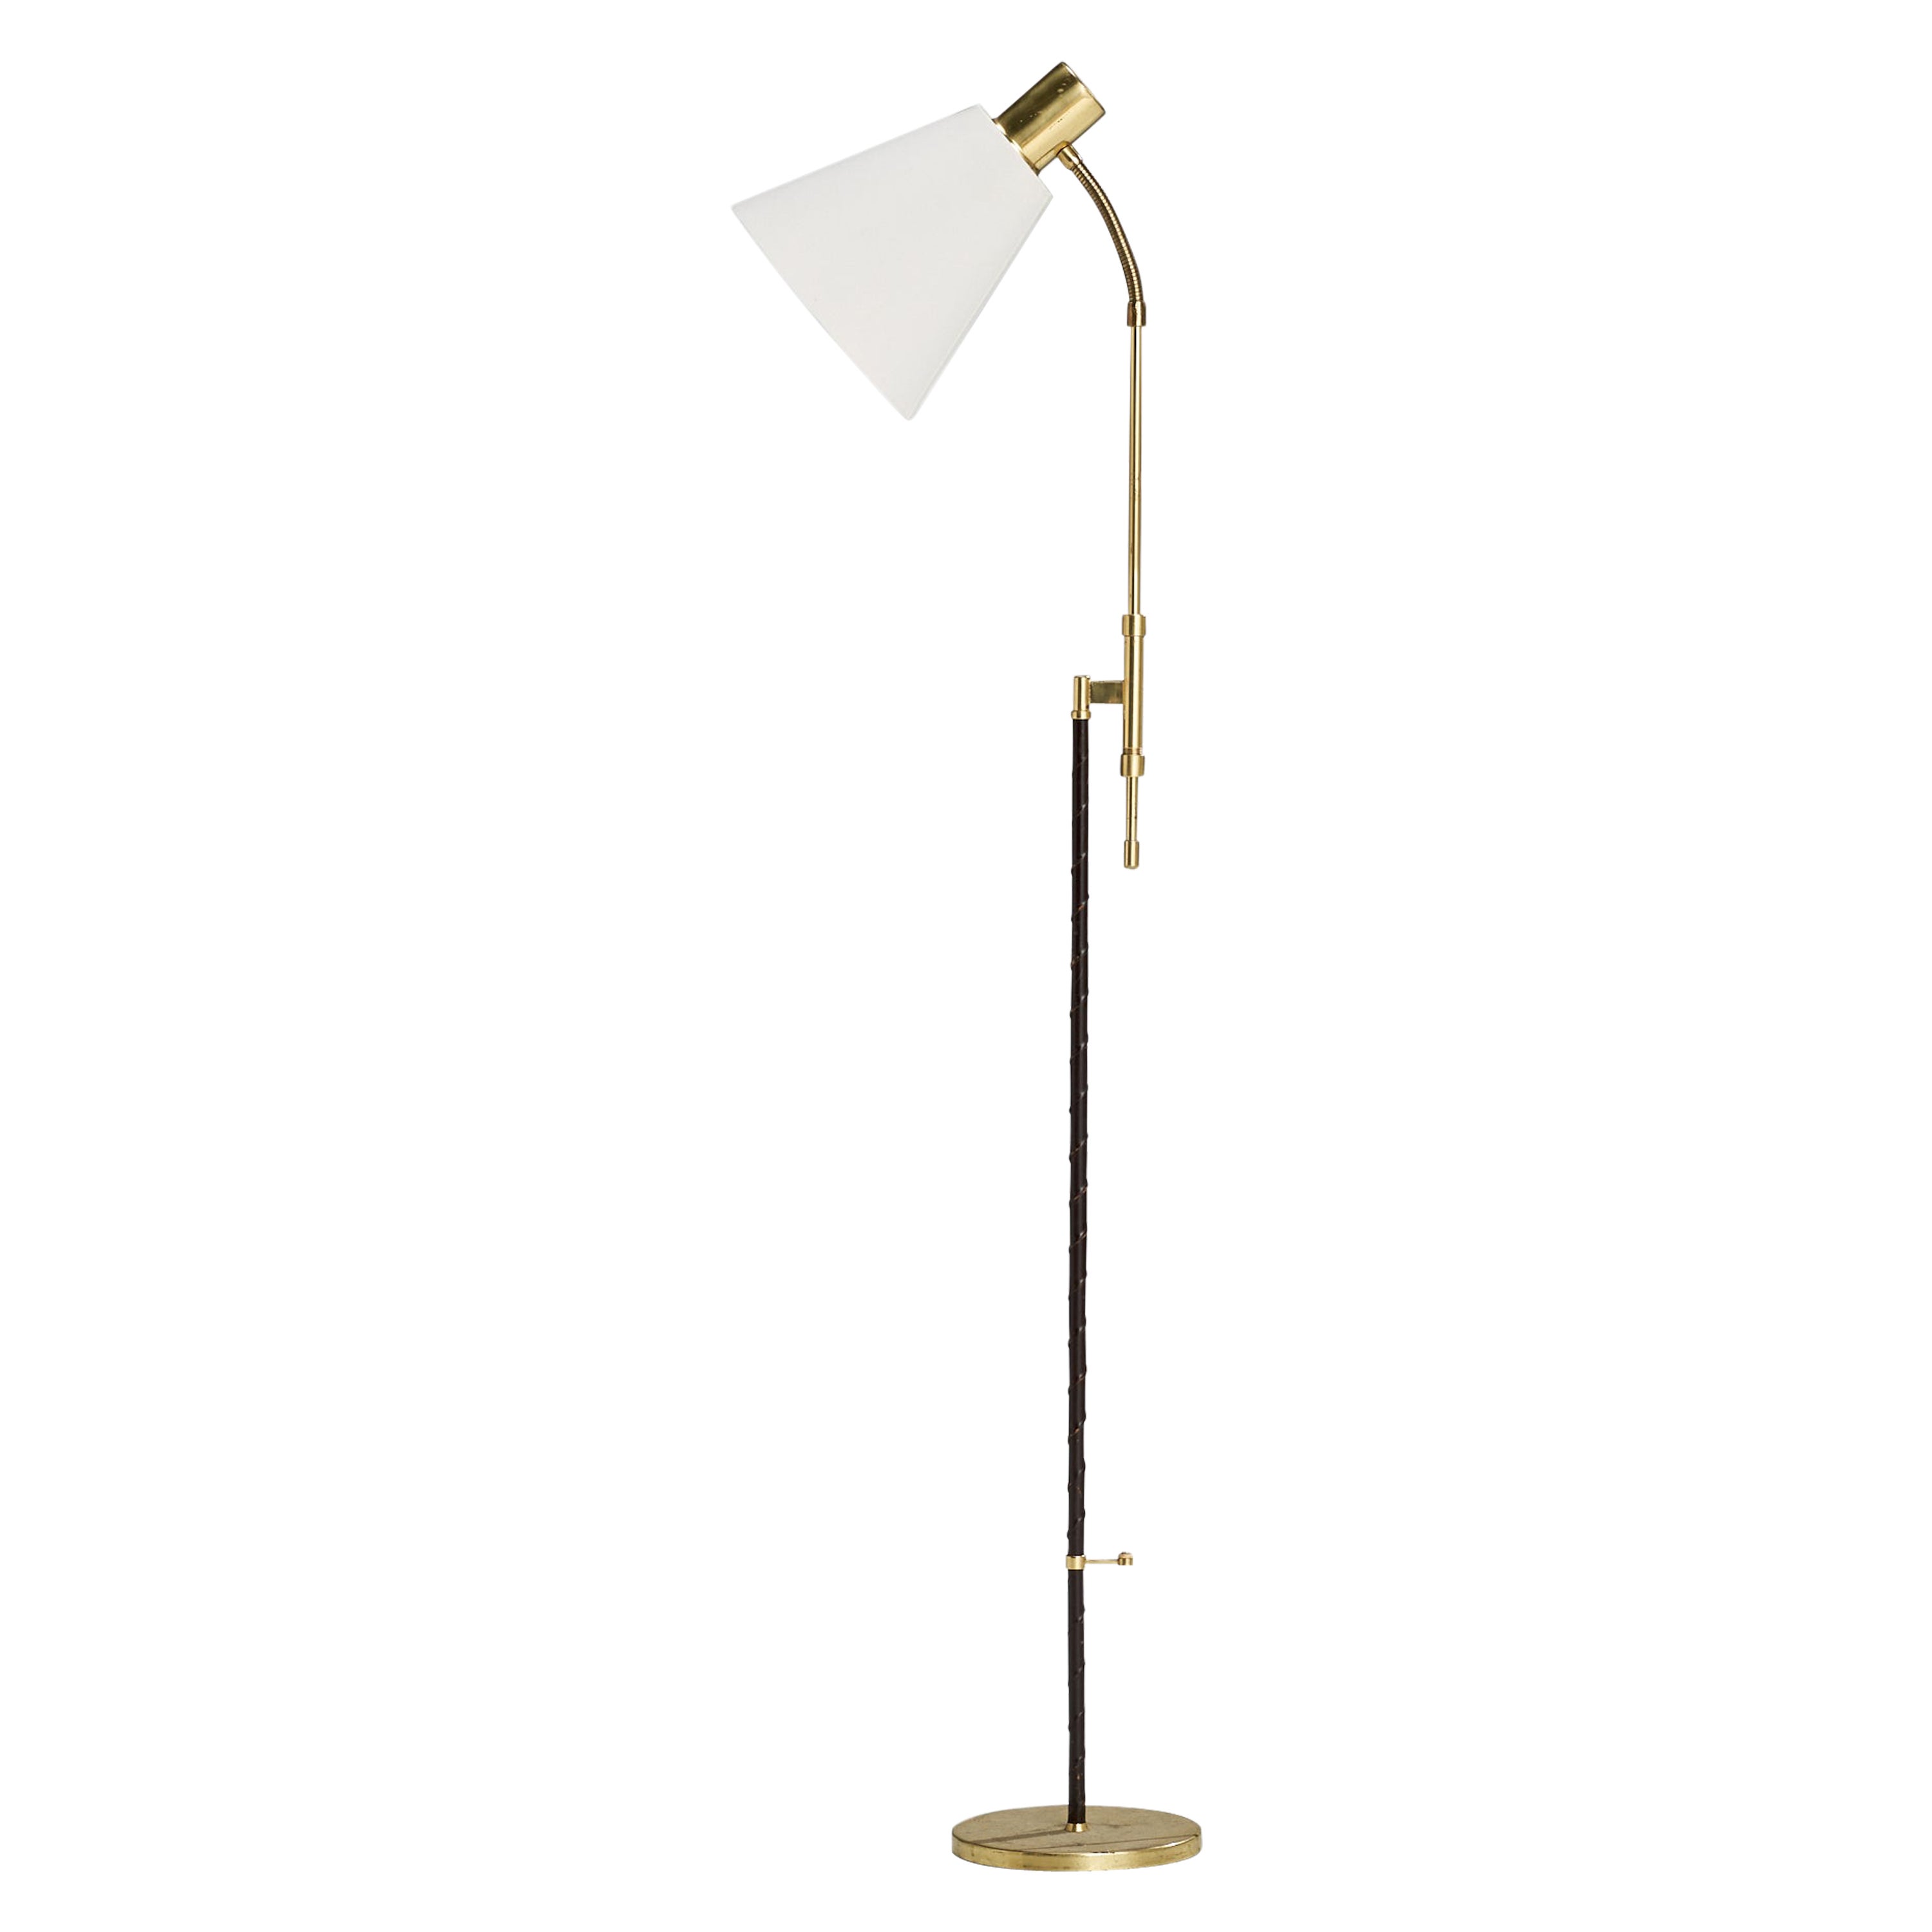 Falkenbergs Belysning, Floor Lamp, Brass, Leather, Fabric, 1950s For Sale